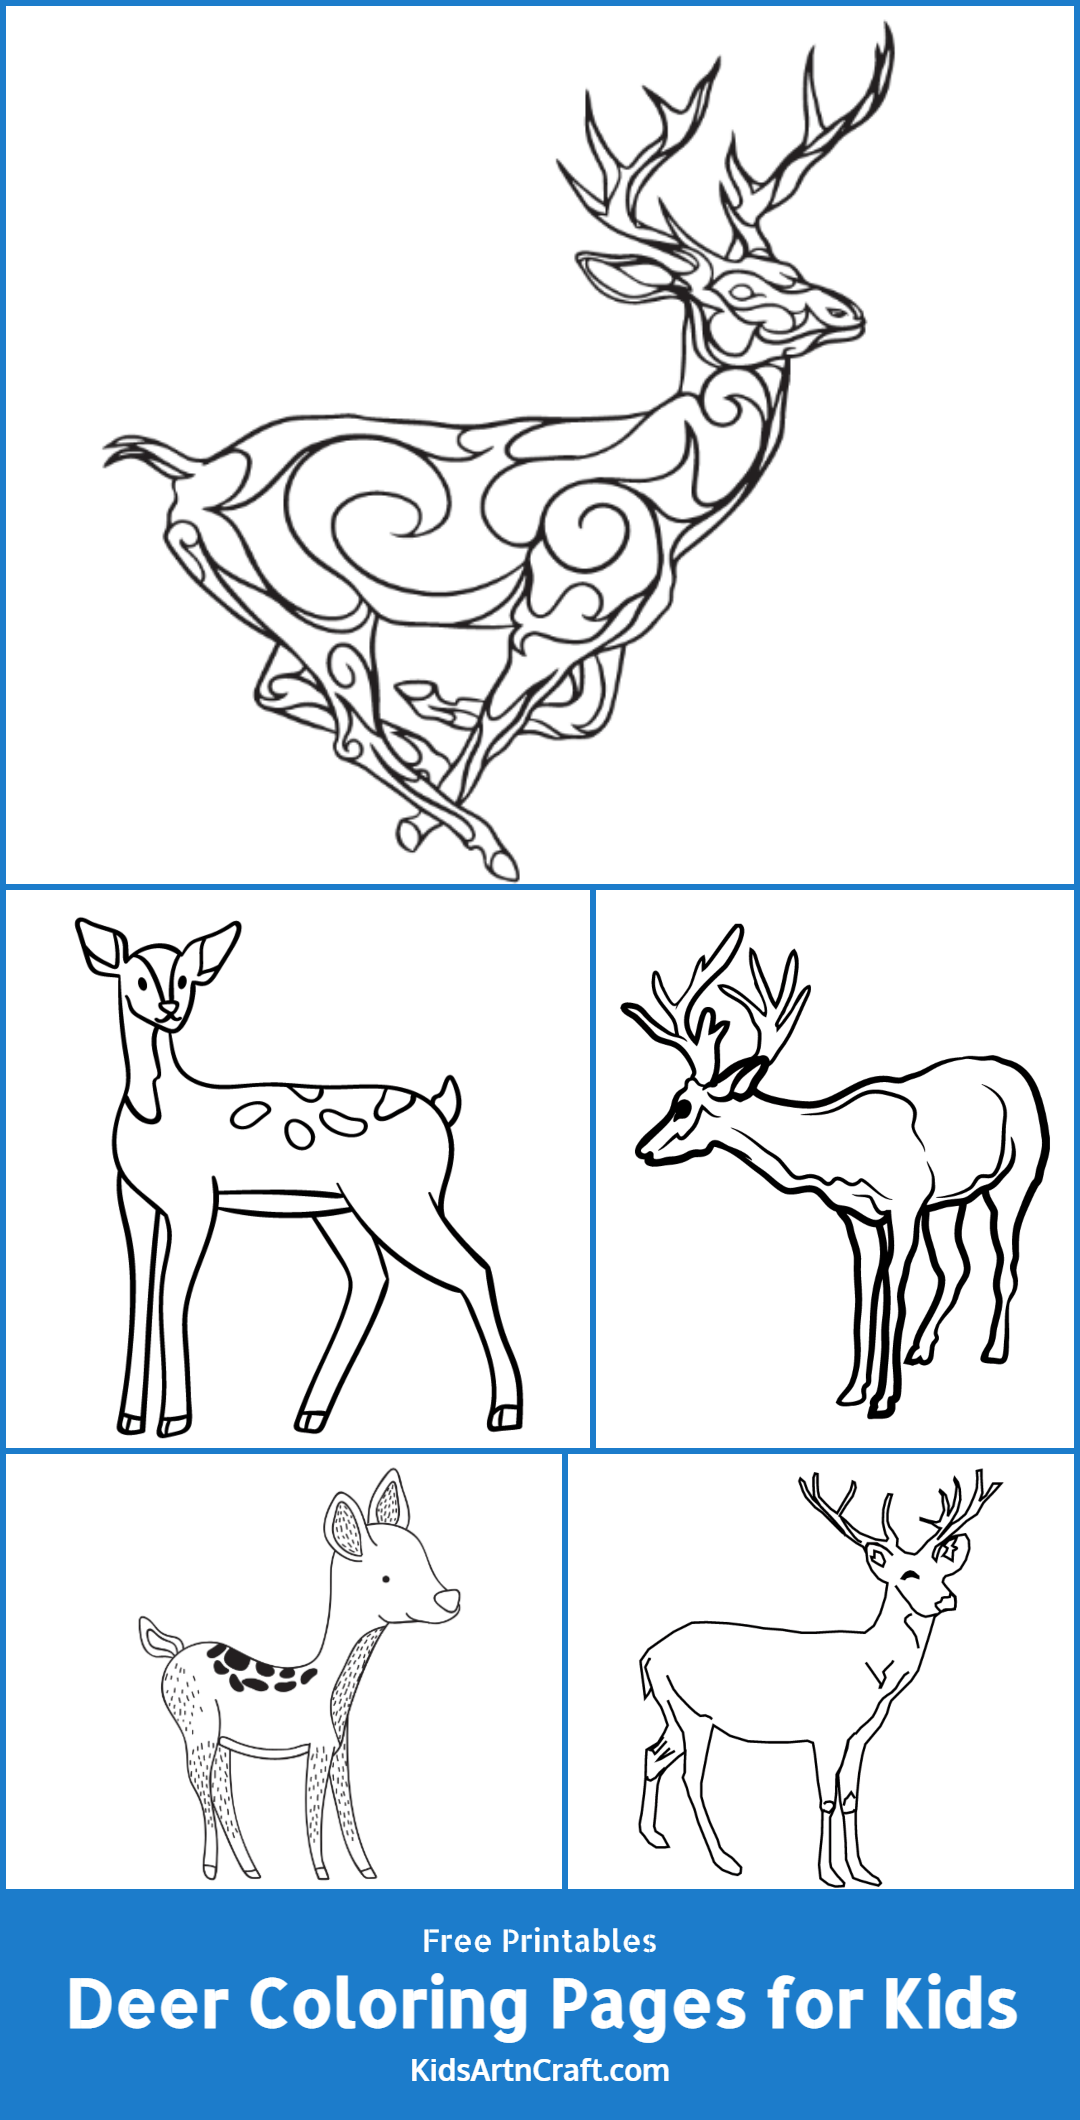 Deer Coloring Pages for Kids – Free Printables